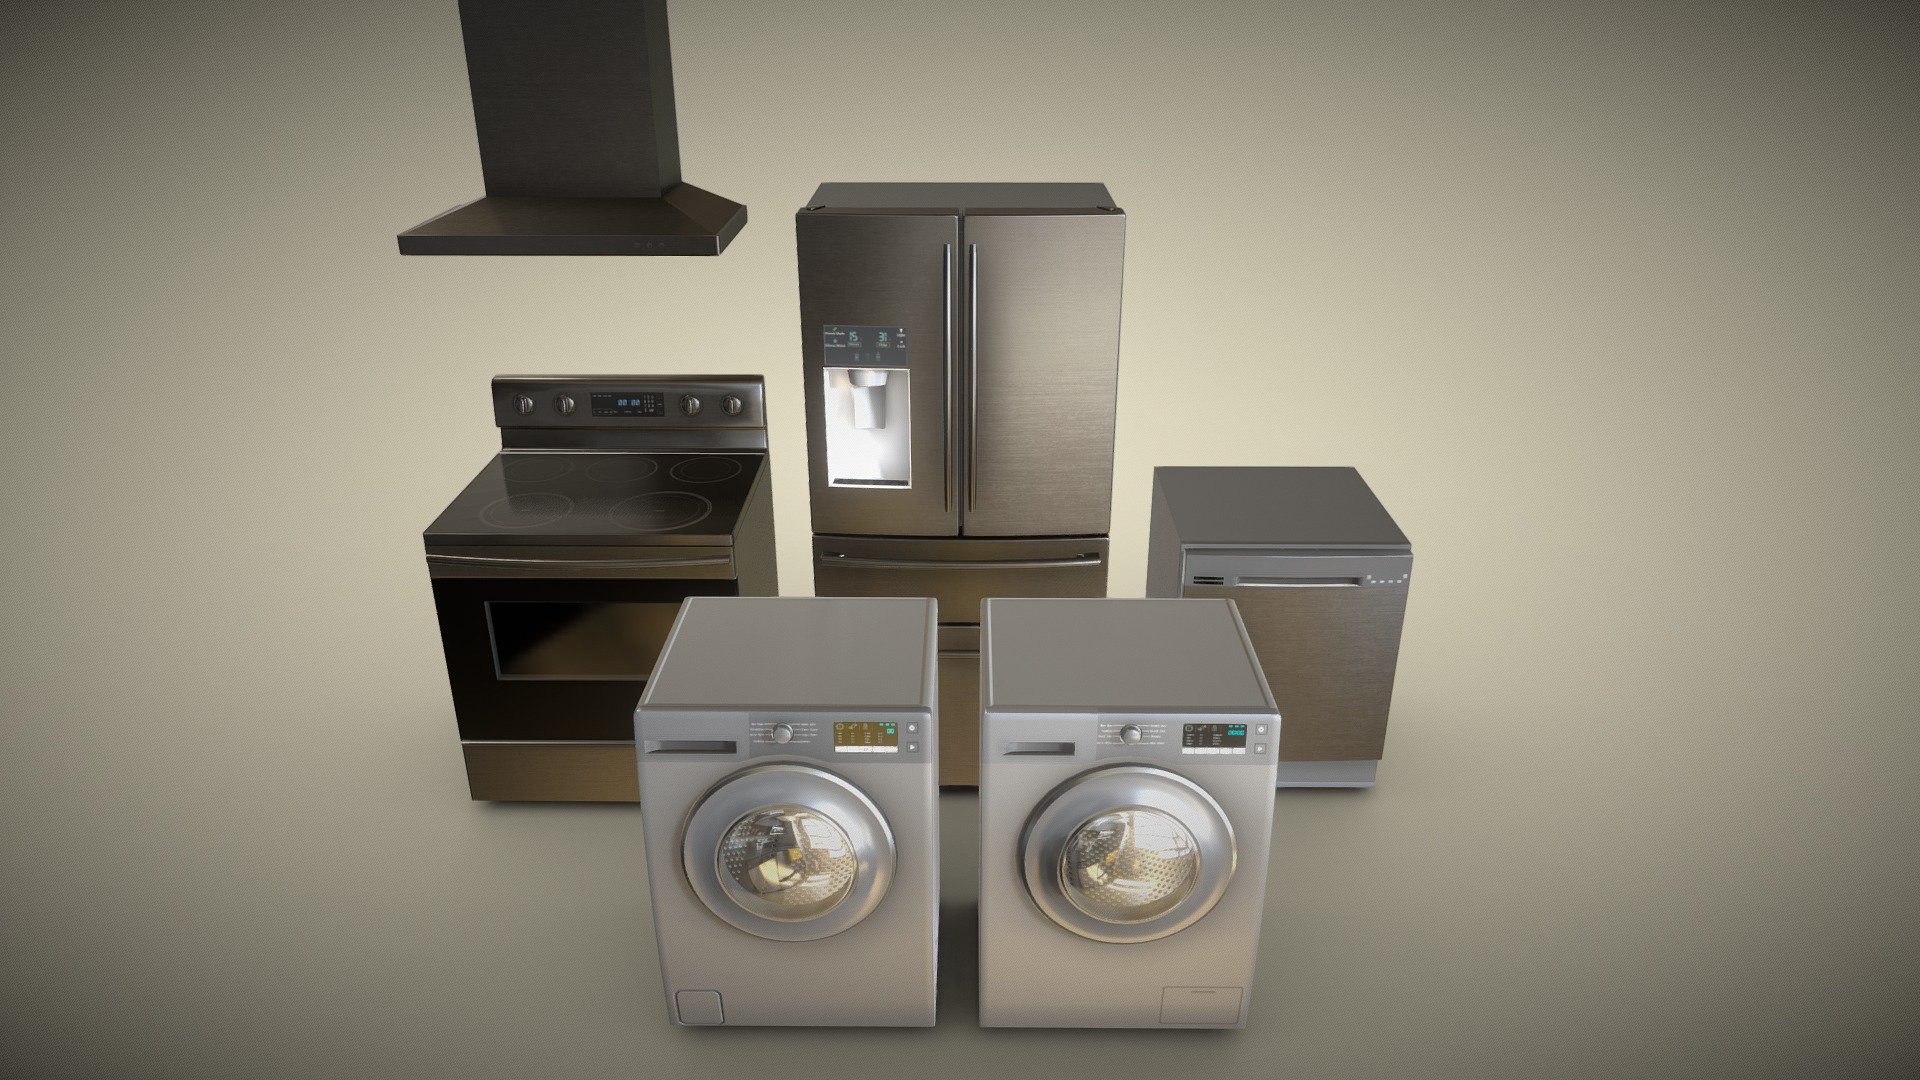 Modern Appliances

12,728 polys, 12,821 verts (All 6 Assets)

Texel Density: 10.24px/cm @4096x4096 5.12px/cm @2048x2048

Centimeter World Scale

5 Material Sets (All 6 Assets)

Fridge: 3,035 Verts, 2,911Faces, 1 Material Set Oven: 1,552 Verts, 1,579 Faces, 1 Material Set Dishwasher: 270 Verts, 263 Faces, Shared Material Set Oven Vent: 84 Verts, 84 Faces, Shared Material Set Washing Machine: 4,350 Verts, 4,343 Faces, 1 Material Set Dryer: 3,530 Verts, 3,548 Faces, 1 Material Set

File Includes: FBX OBJ DAE Blend 3DS STL PNG Textures 4096 and 2048 Resolution TIFF Textures 4096 and 2048 Resolution

Please contact me if you have any questions or business inquiries: bsw2142@gmail.com

You Can Also Get A Quote From Me Via Questioneer! Google Forms - Modern Appliances - Buy Royalty Free 3D model by Brandon Westlake (@dr.badass2142) 3d model